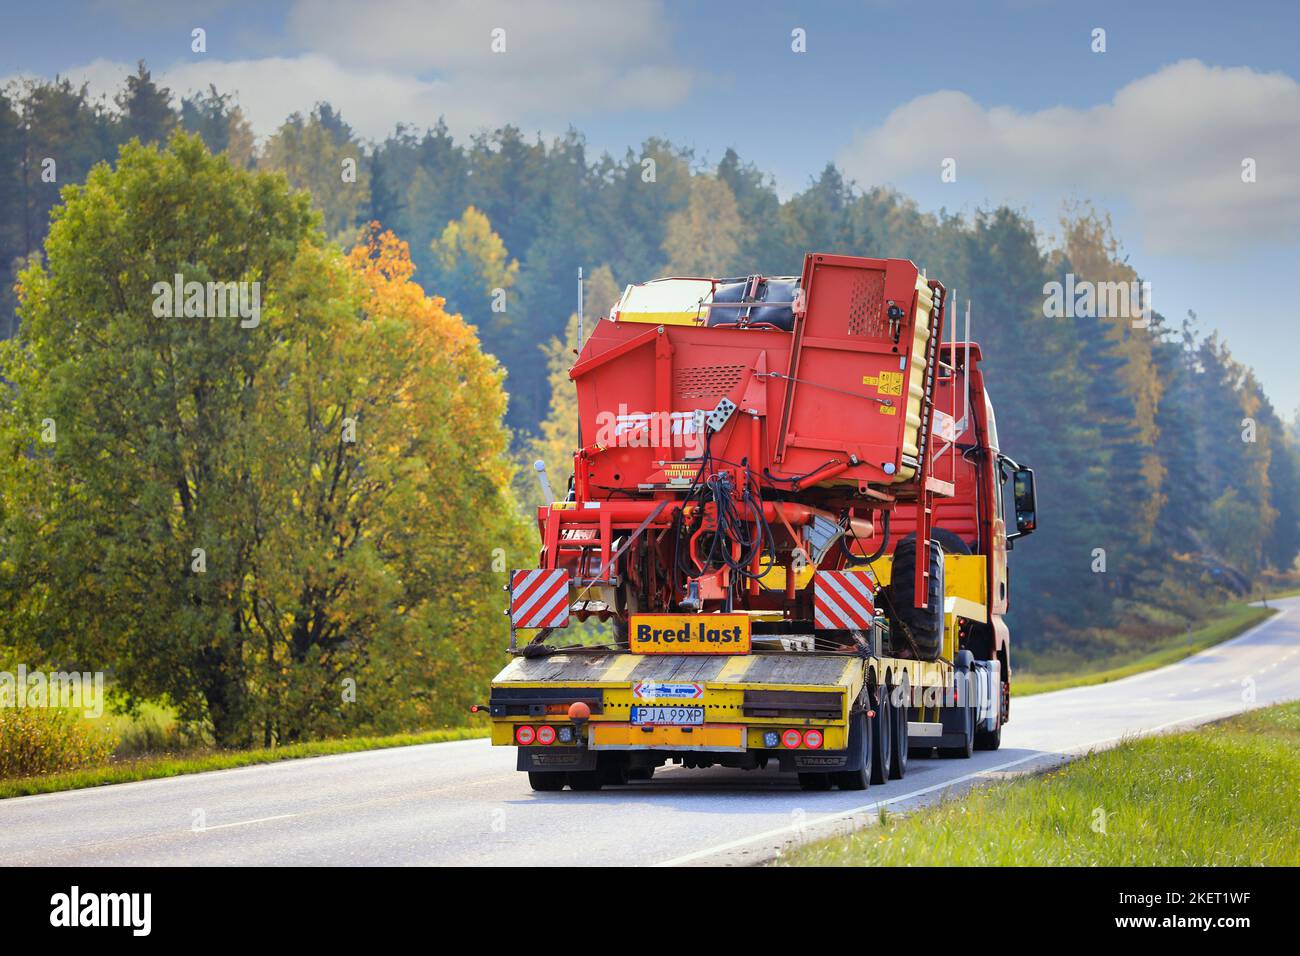 MAN truck of Mateo Transport hauls Grimme SE 75-30 potato harvester on road on a beautiful day of autumn, rear view. Salo, Finland. Sept 25, 20. Stock Photo